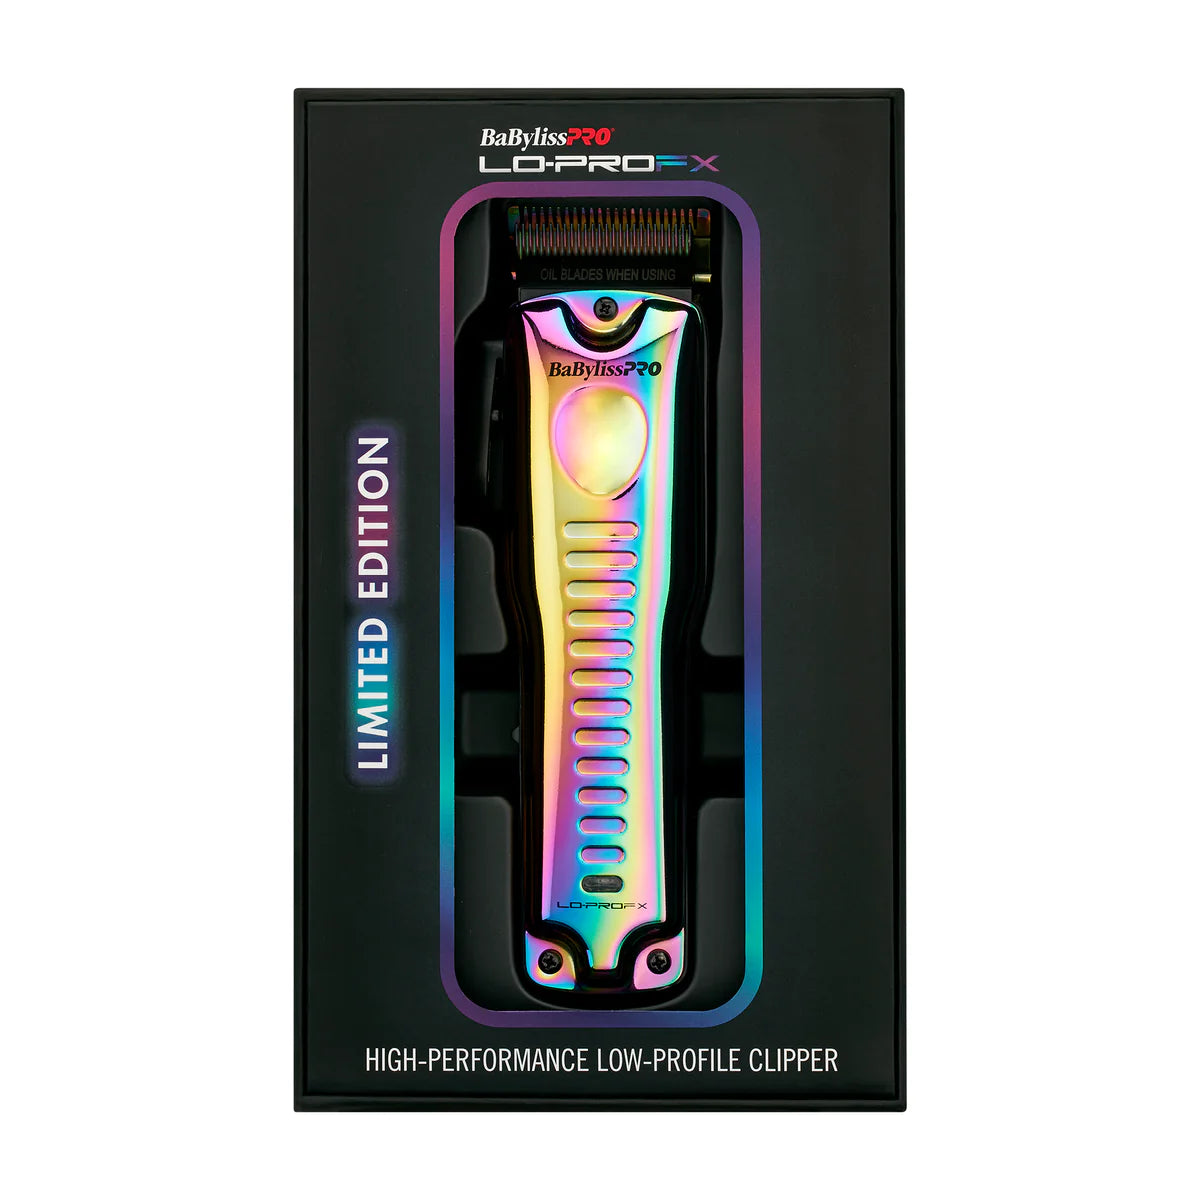 BaByliss PRO Limited Edition Iridescent Lo-Pro FX High-Performance Low